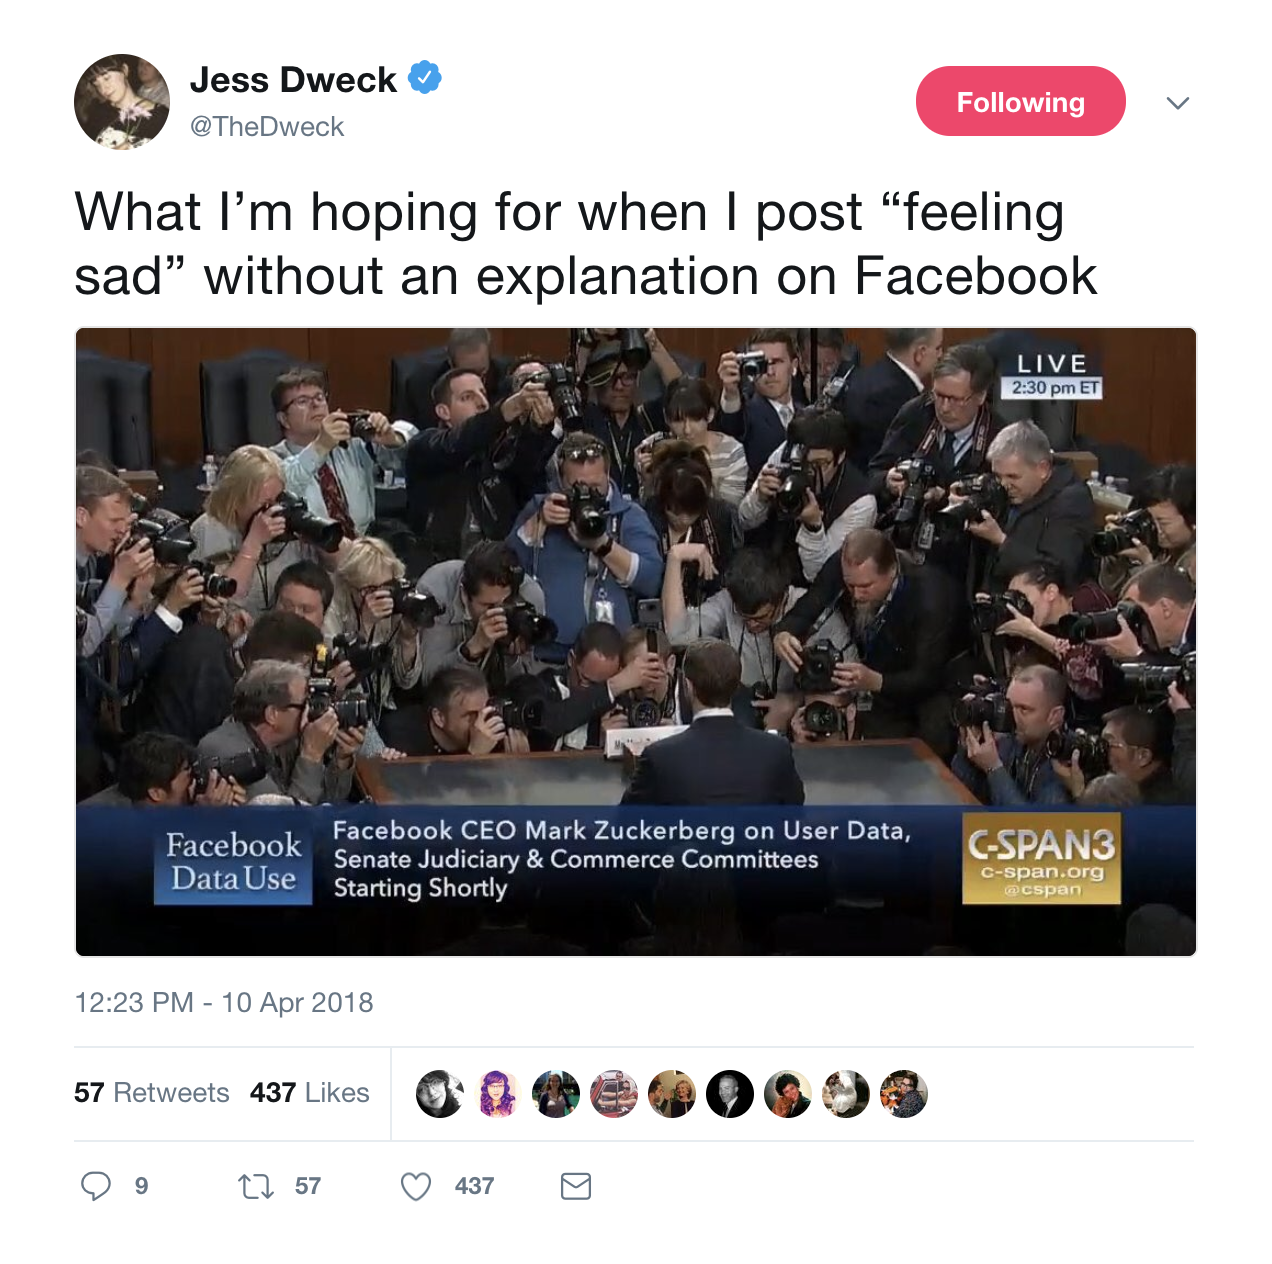 mark zuckerberg court room - Jess Dweck ing What I'm hoping for when I post "feeling sad" without an explanation on Facebook Live 230 pm Et Facebook Data Use Facebook Ceo Mark Zuckerberg on User Data, Senate Judiciary & Commerce Committees Starting Shortl